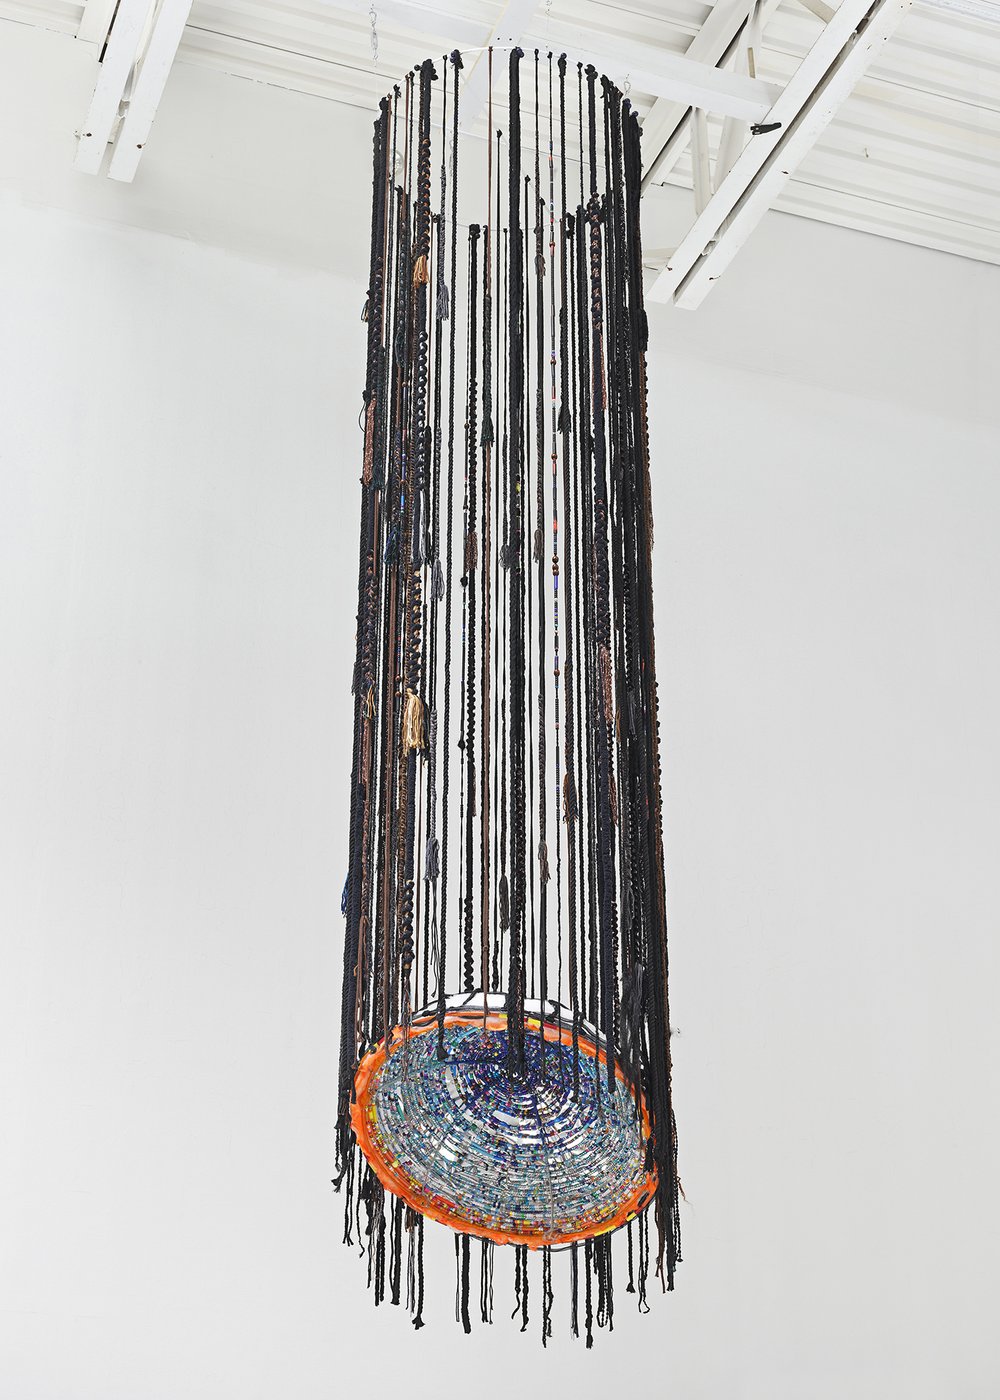  Quinci Baker,  Wish Upon a Dying Star , 2022, Steel, mixed yarn, cotton string, synthetic hair, jump rope beads, pony beads, glass beads, 144 x 32 x 32 inches. 